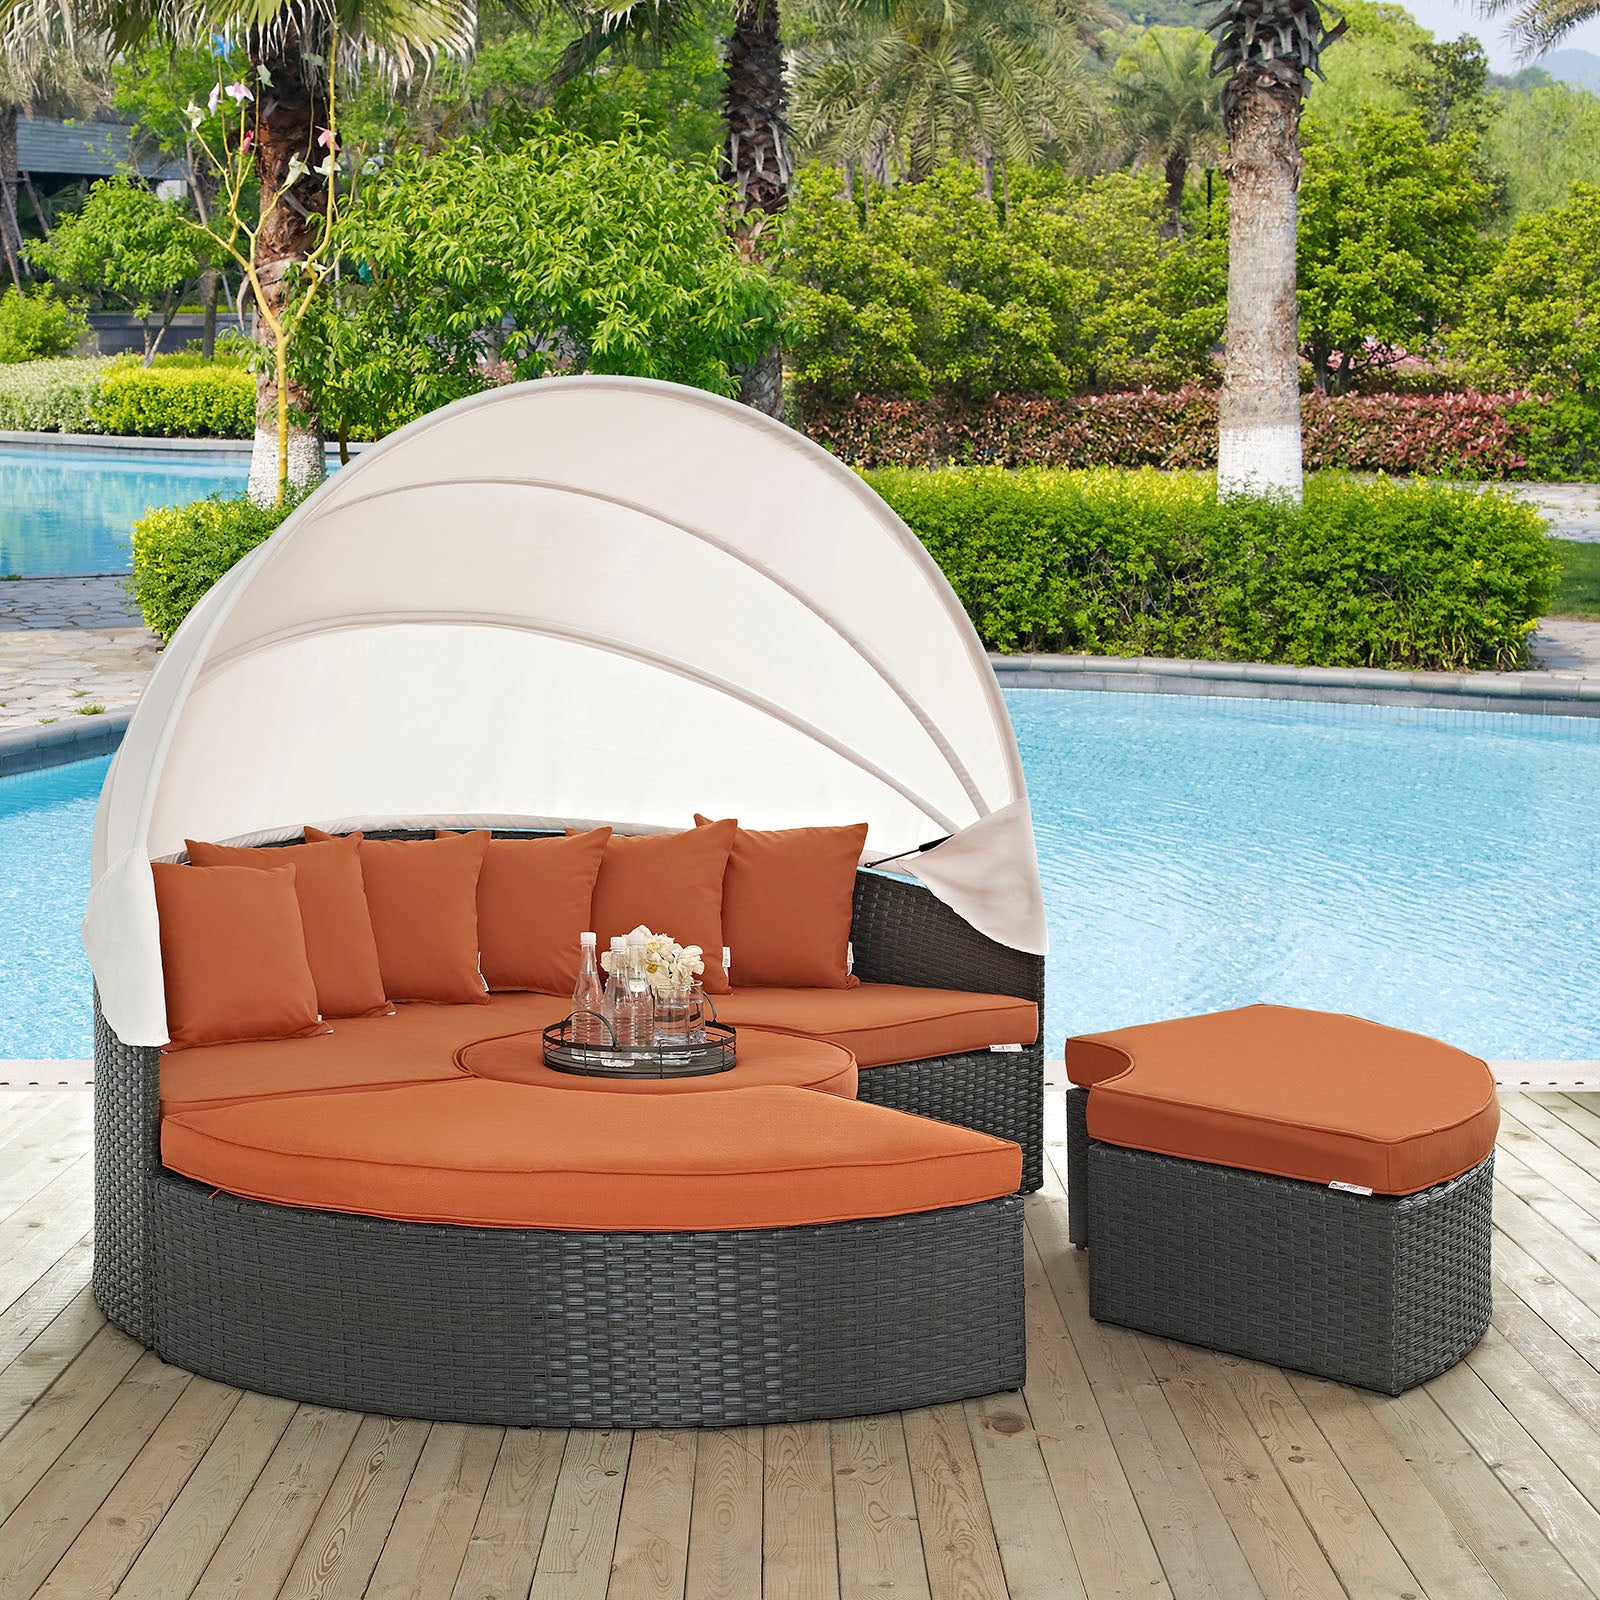 Modway Patio Daybeds - Sojourn Outdoor Patio Sunbrella Daybed Canvas Tuscan